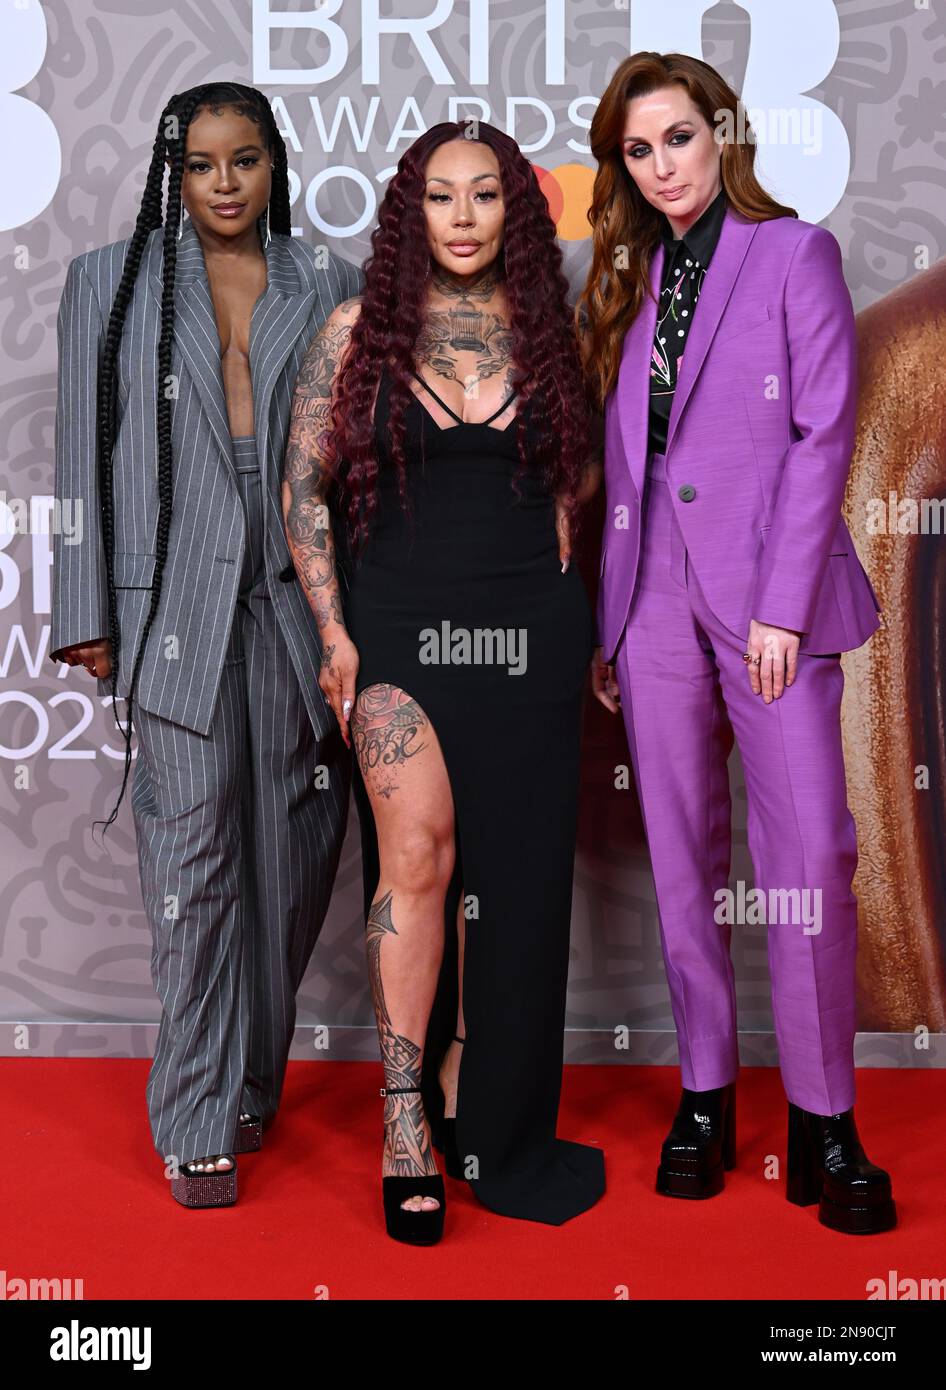 EDITORIAL USE ONLY February 11th, 2023, London, UK. Keisha Buchanan, Mutya Buena and Siobhan Donaghy from the Sugababes arriving at The BRIT Awards 2023, O2 Arena, London. Credit: Doug Peters/EMPICS/Alamy Live News Stock Photo